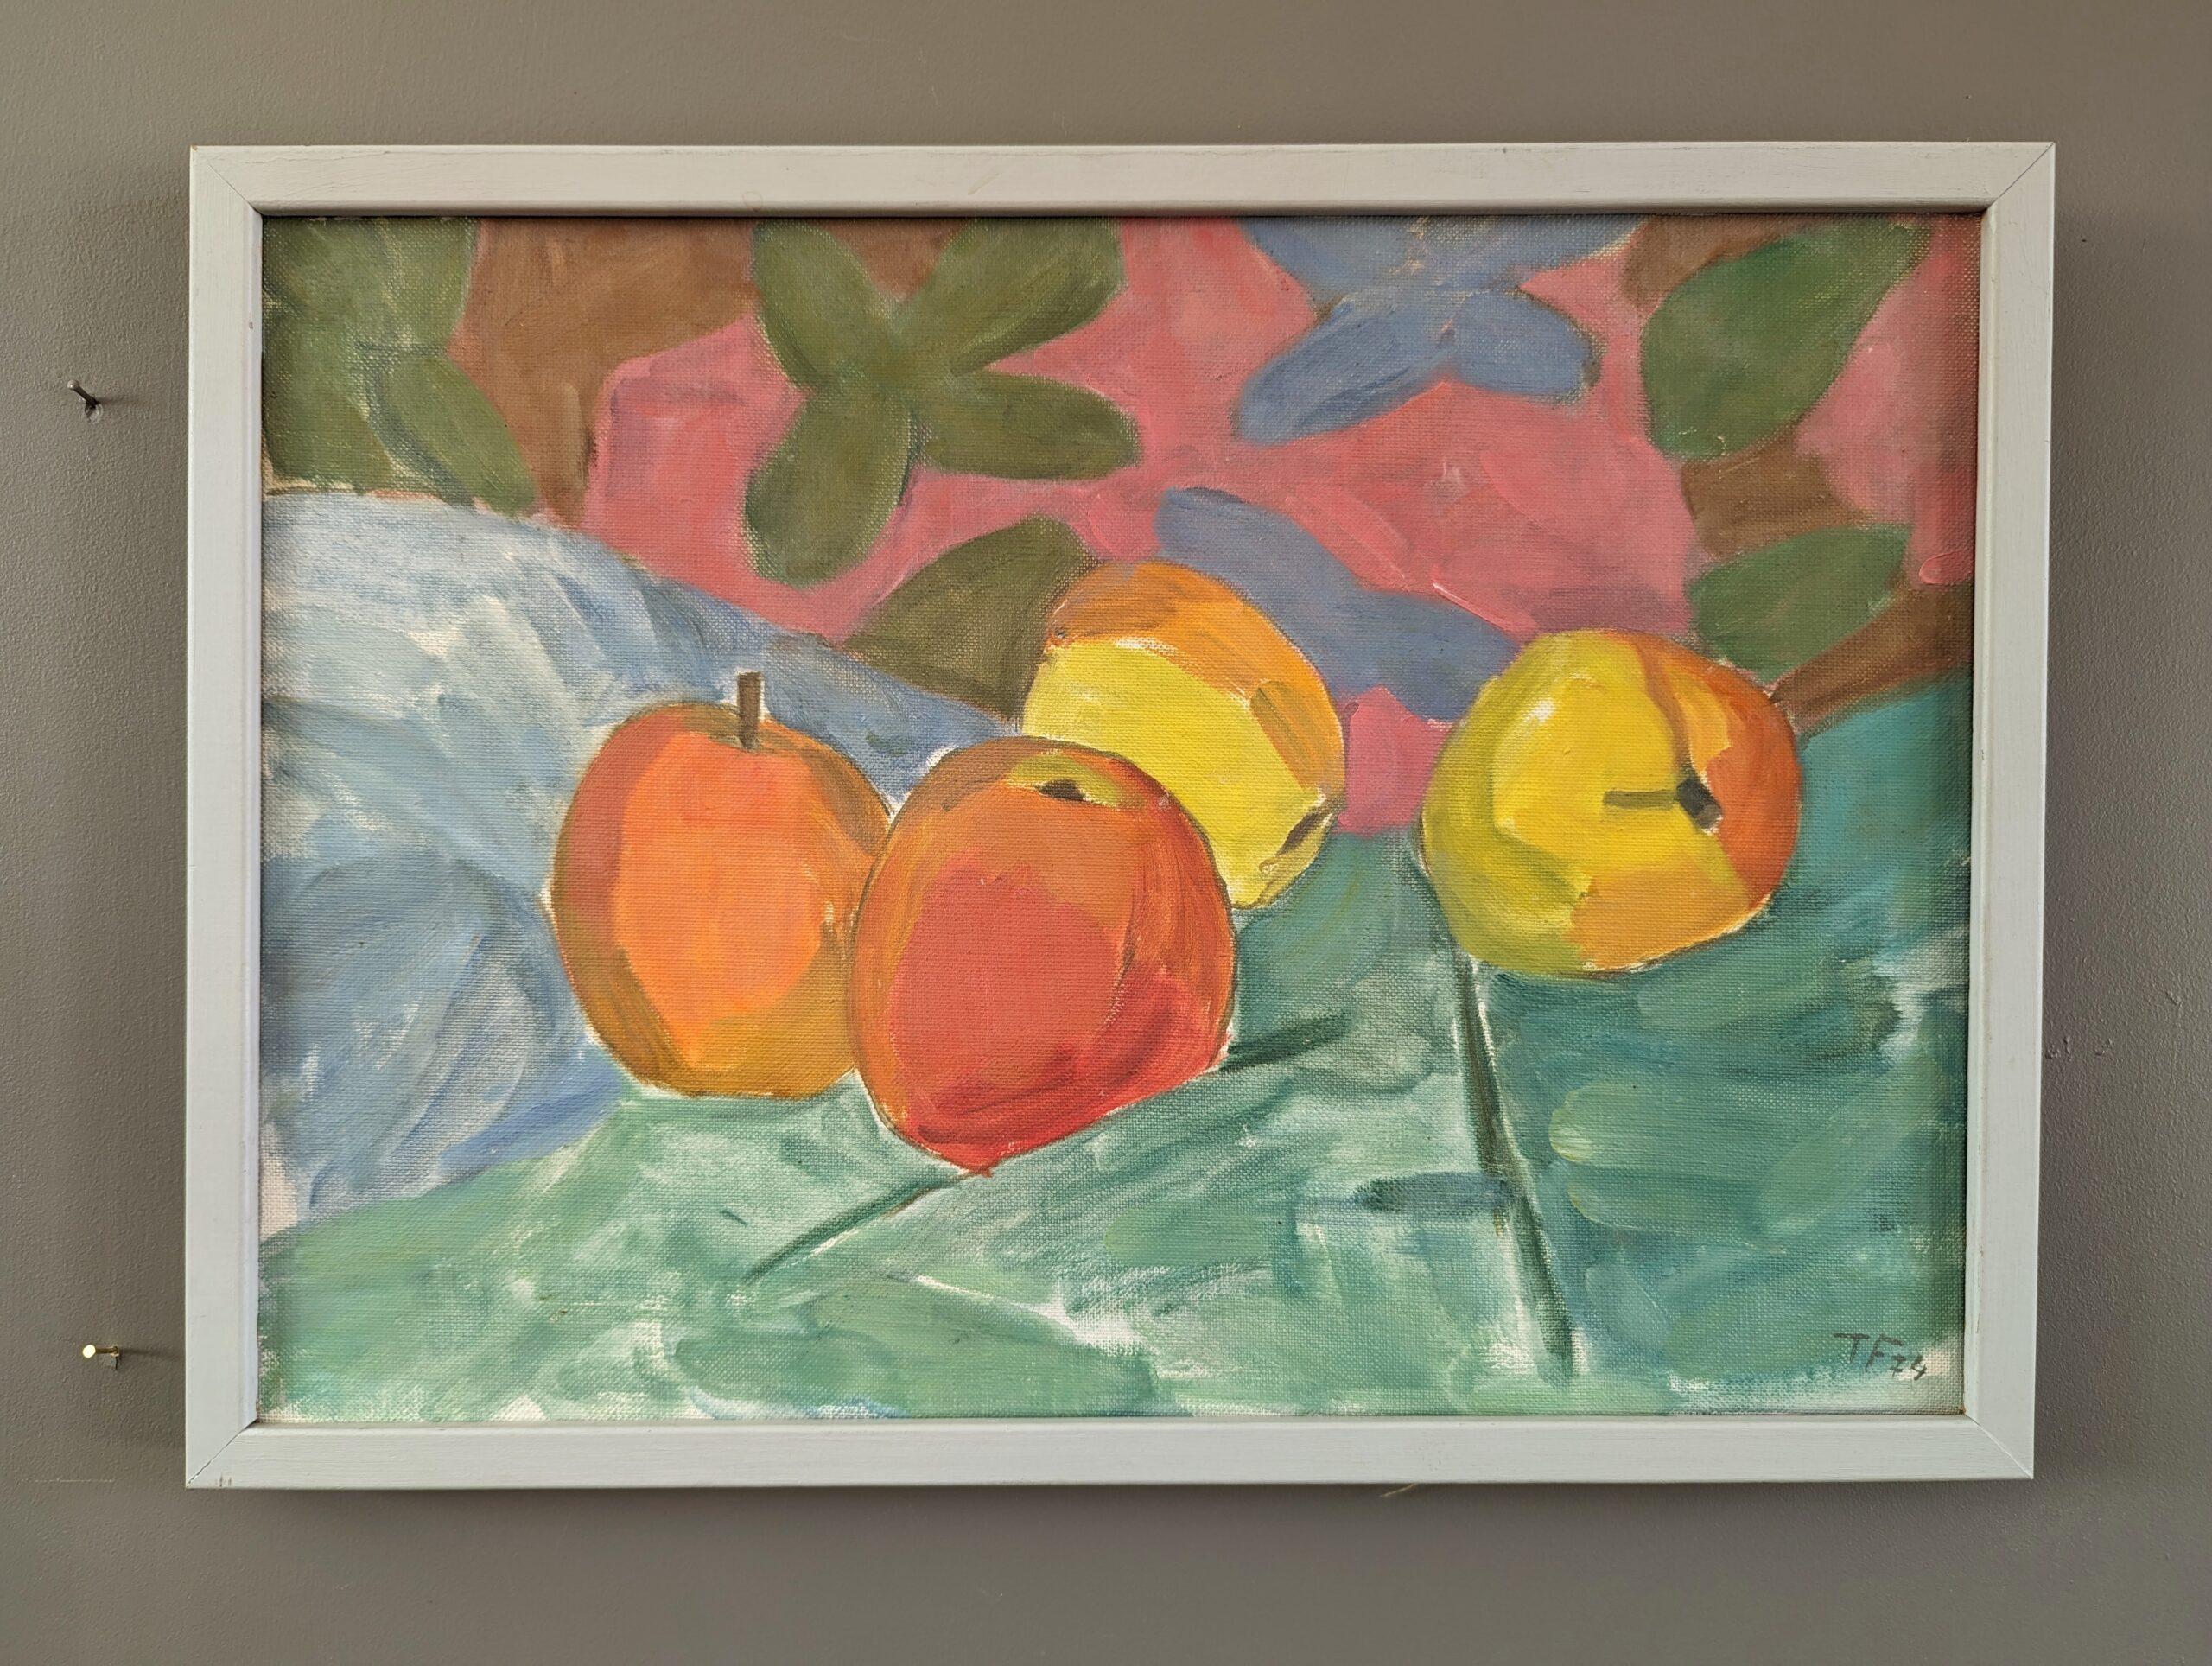 FOUR APPLES 
Size: 31.5 x 43.5 cm (including frame)
Oil on Canvas

A very pleasant modernist still life oil composition dated 1974, and painted by the established Swedish artist Ture Fabiansson (1910-1994), whose works have been exhibited in public